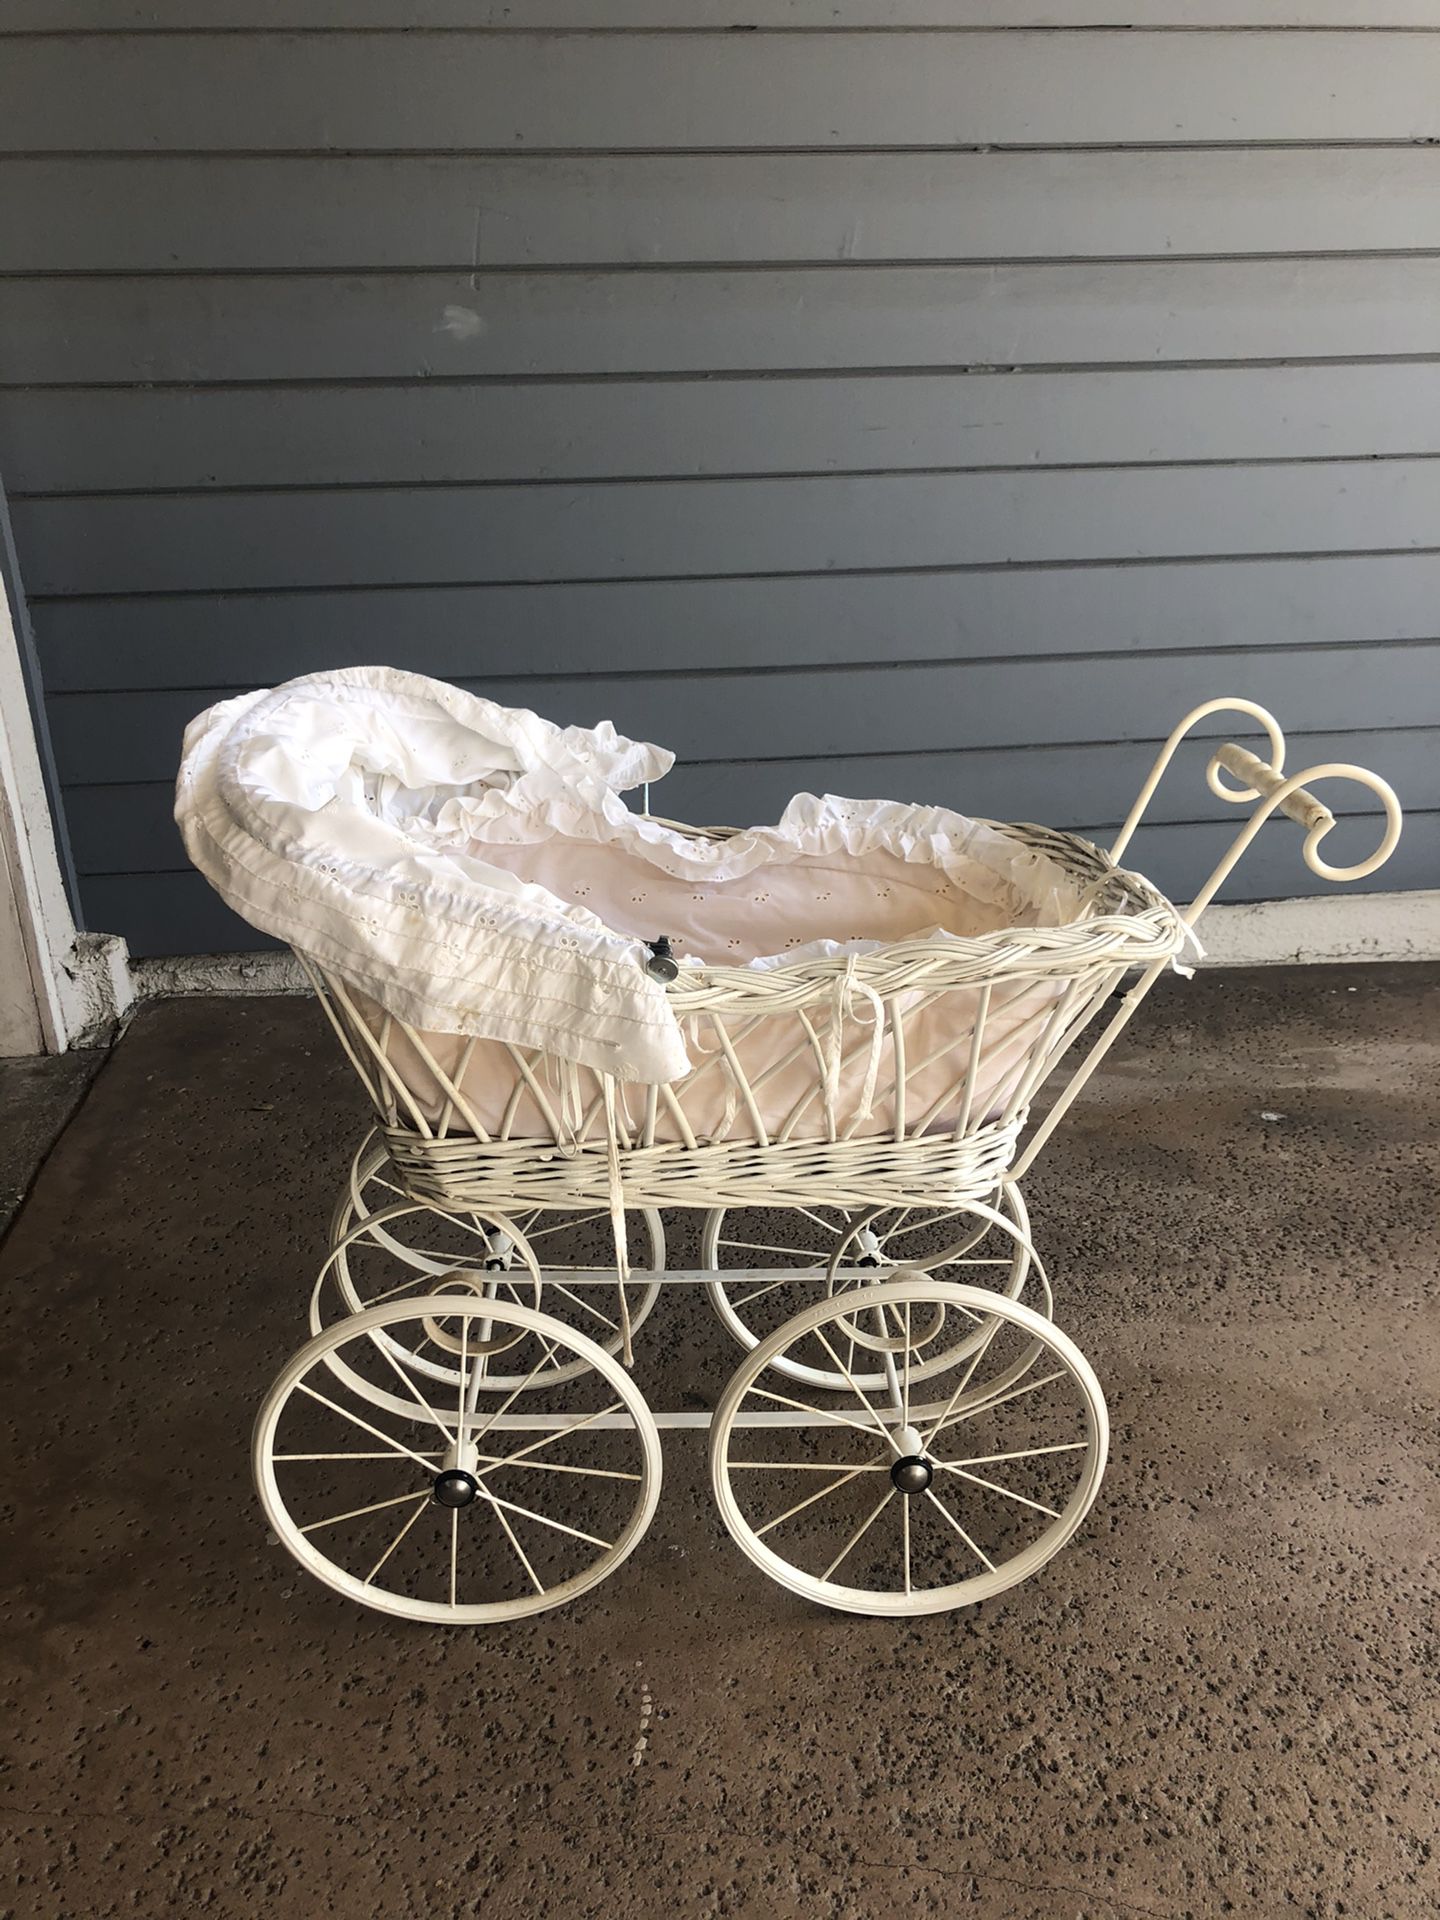 Vintage pram, small (for photo prop, decor or toy)